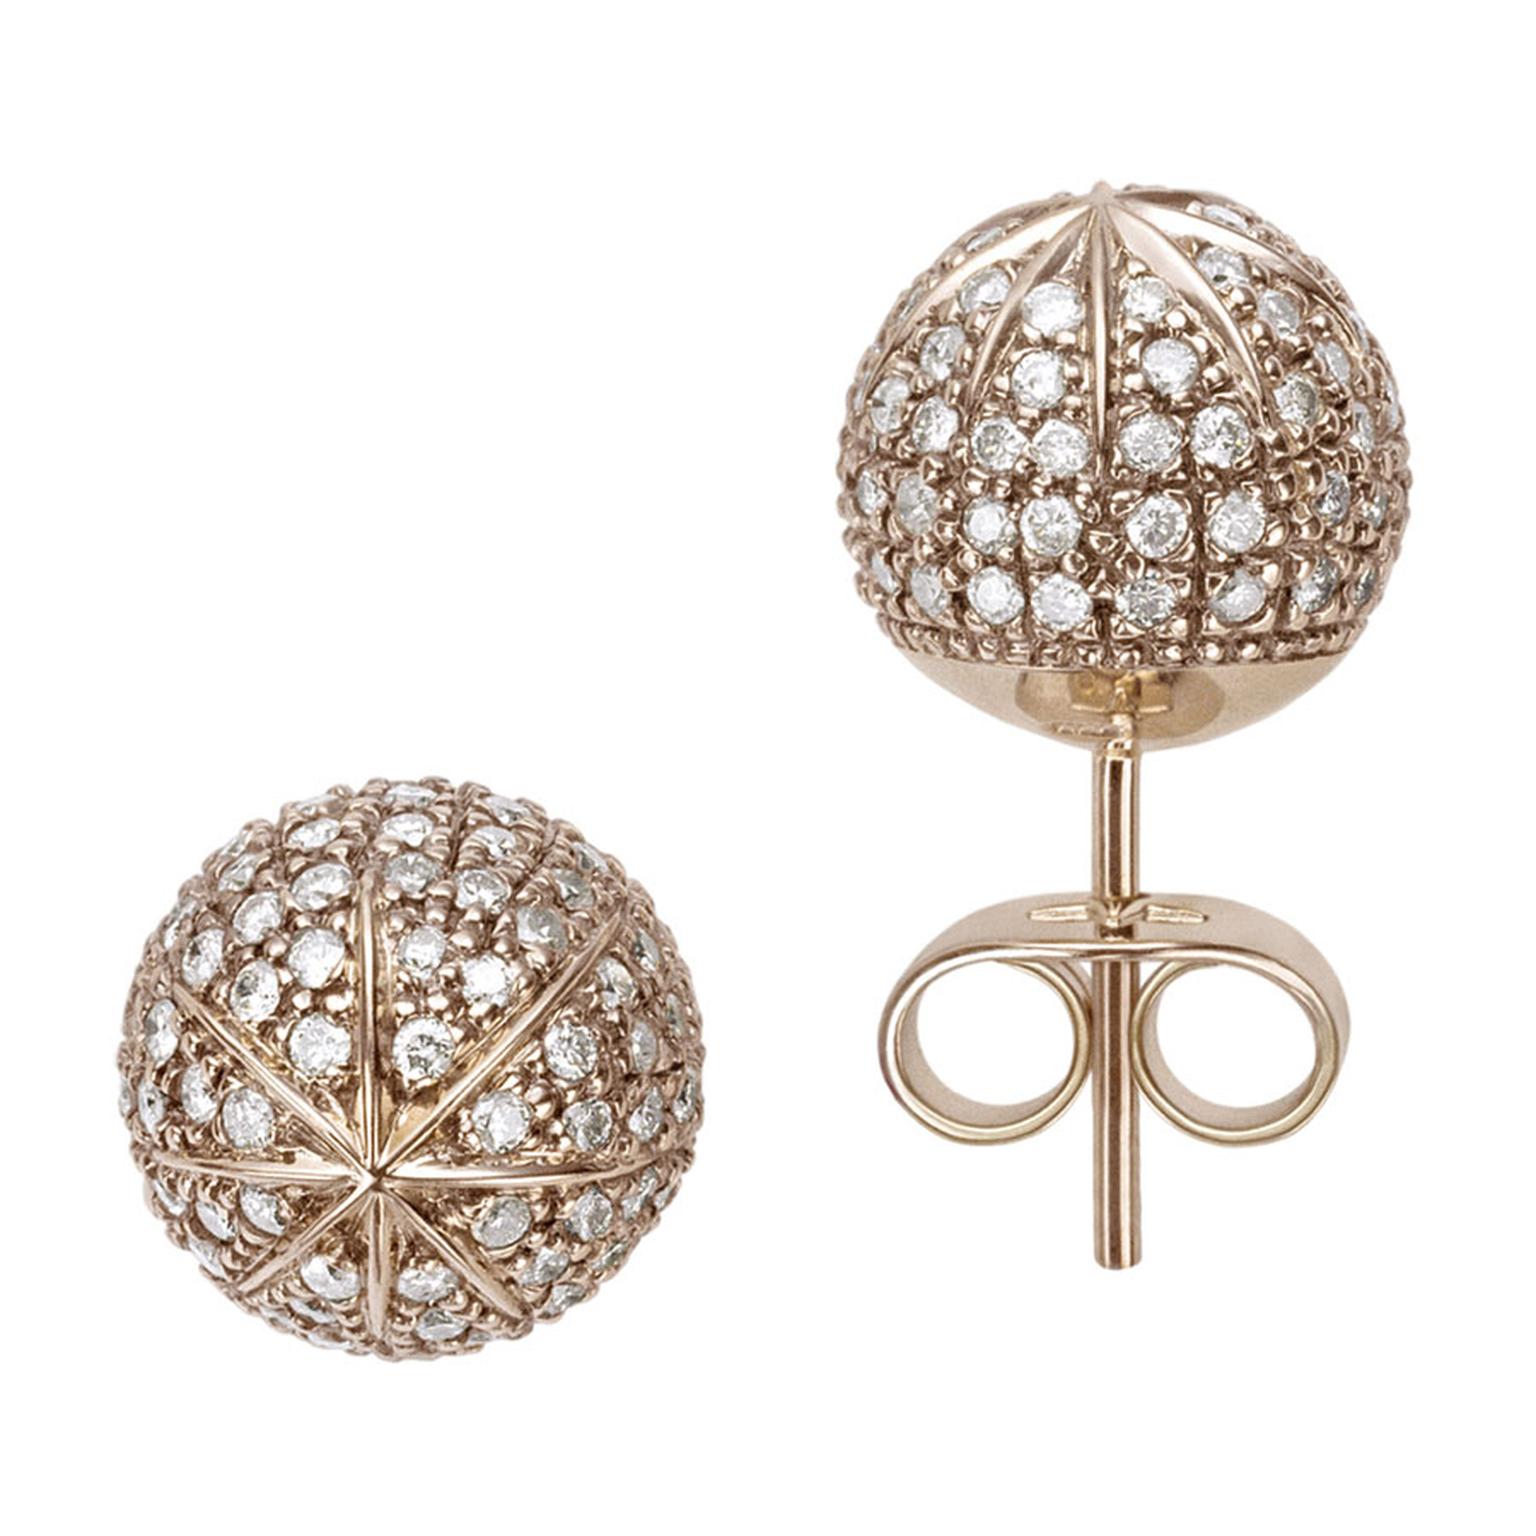 Hstern Copernicus-earrings-in-Noble-Gold-and-diamonds.  £ 3,600